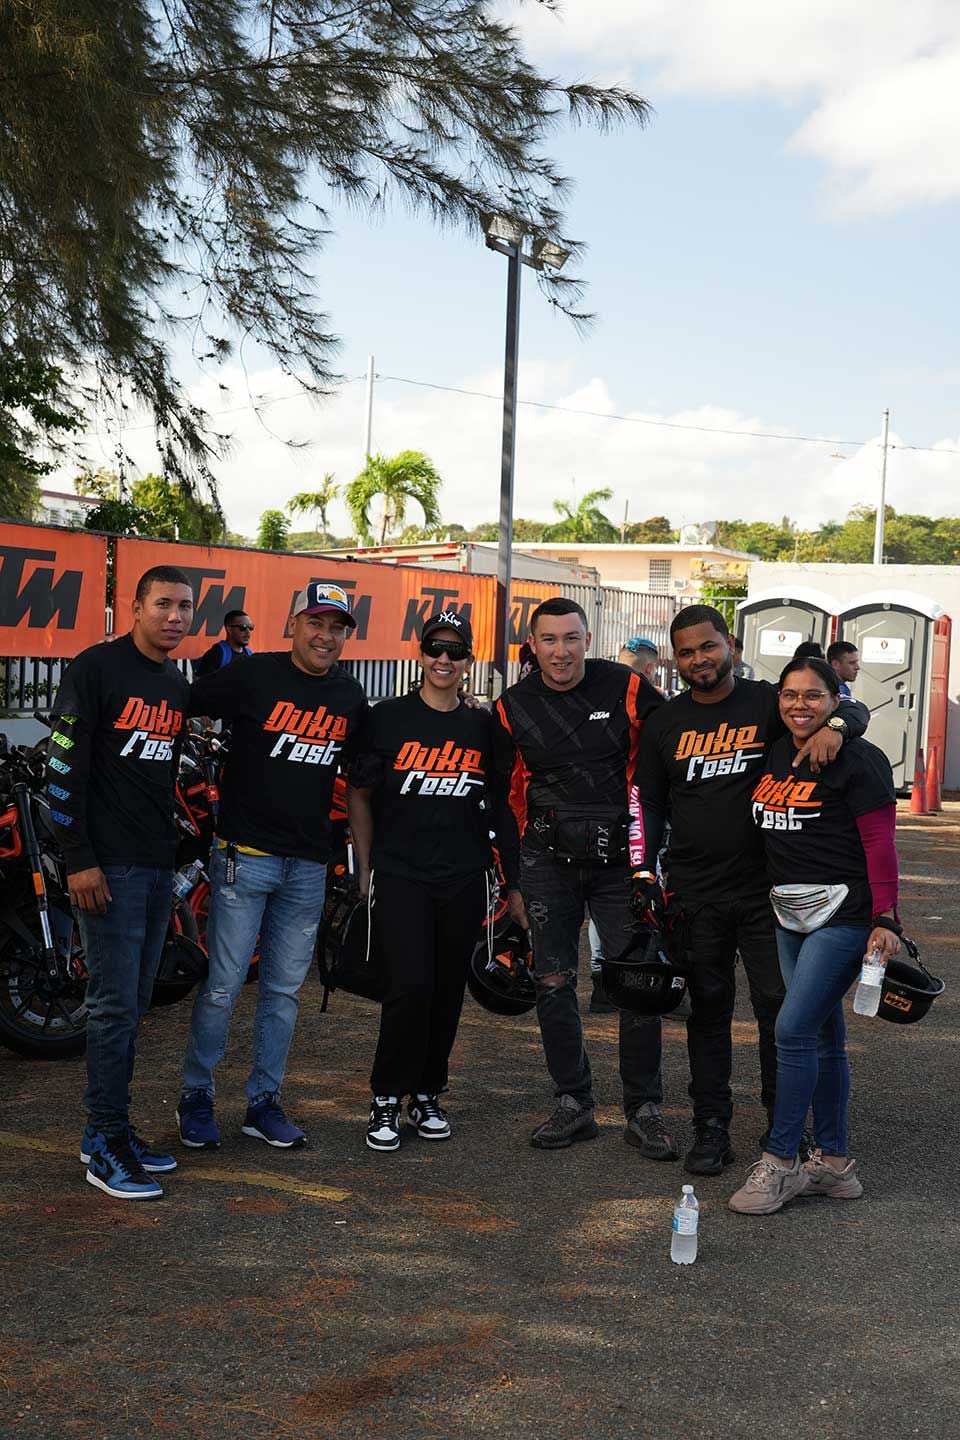 Who knew that the KTM riding community is so strong on the island of Puerto Rico?